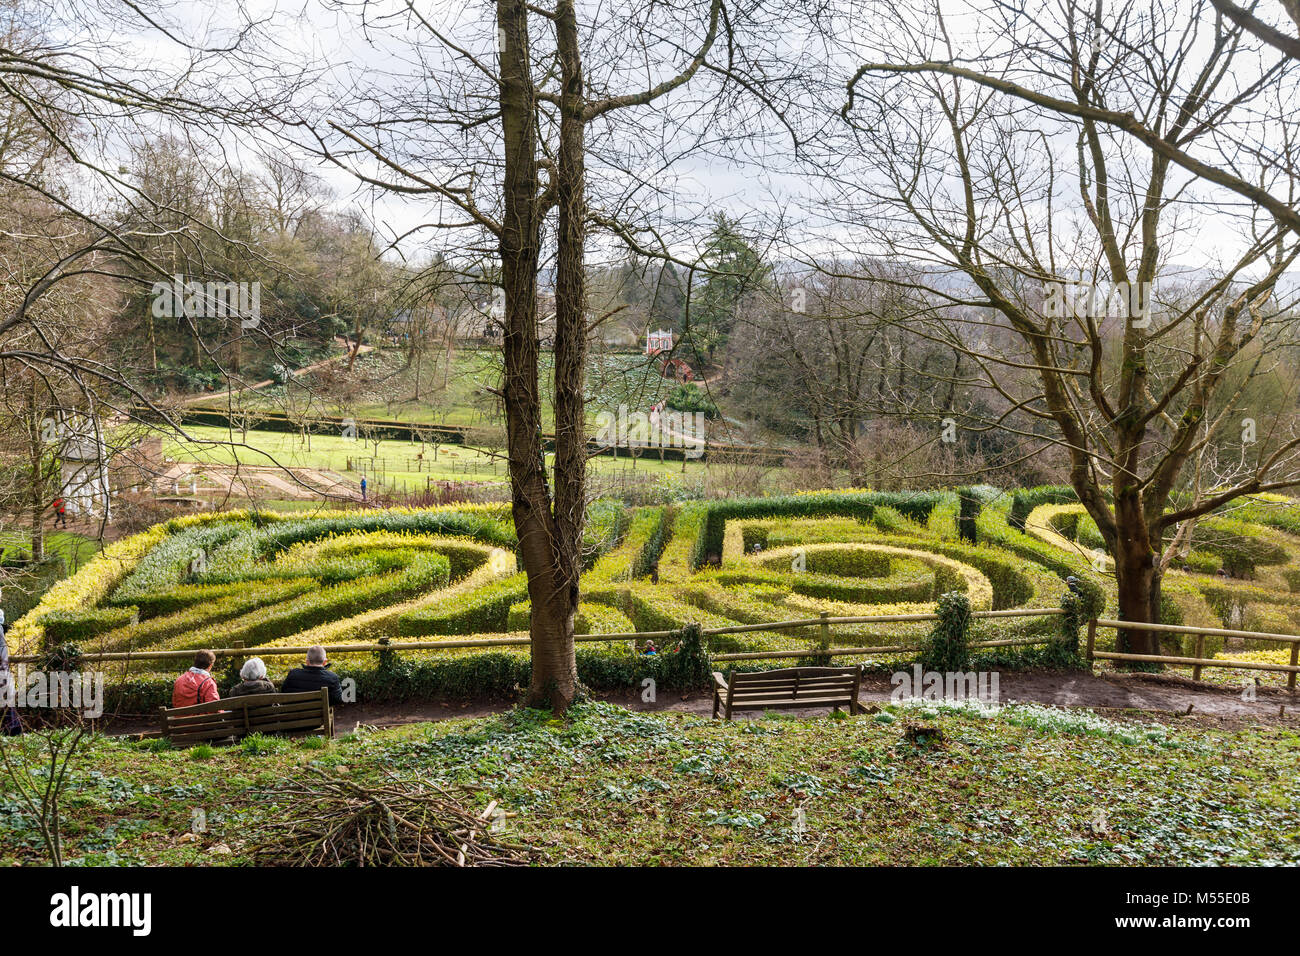 Formal gardens: The privet hedge 250 Anniversary Maze at Painswick Rococo Garden, Painswick, Gloucestershire Cotswolds in winter with snowdrops Stock Photo